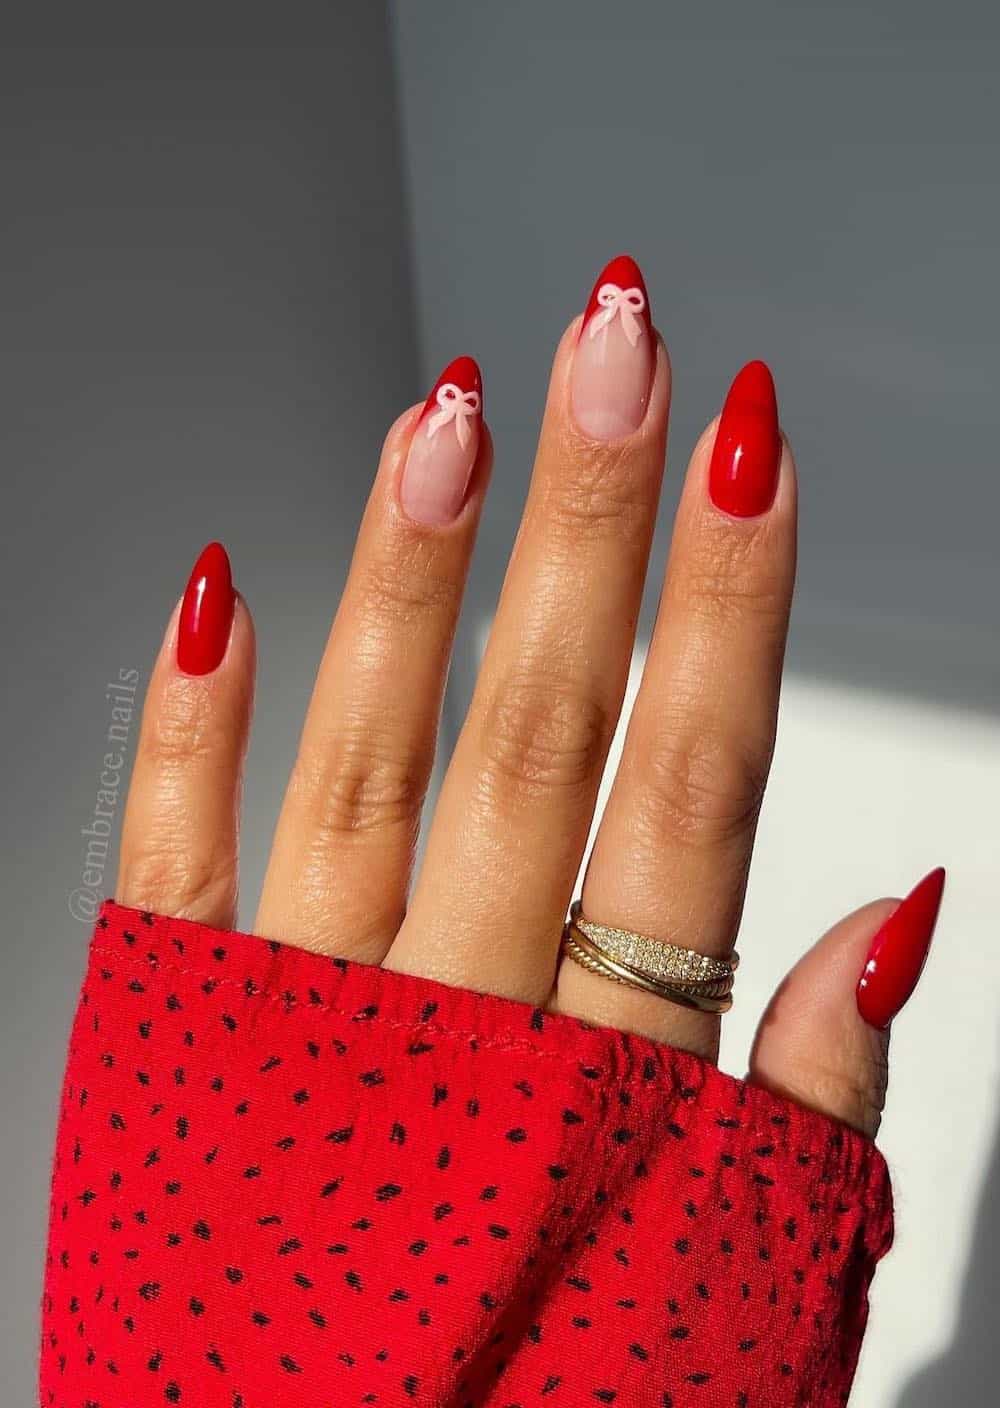 A hand with long almond nails painted a bright red with two red French tipped accents with pink bows